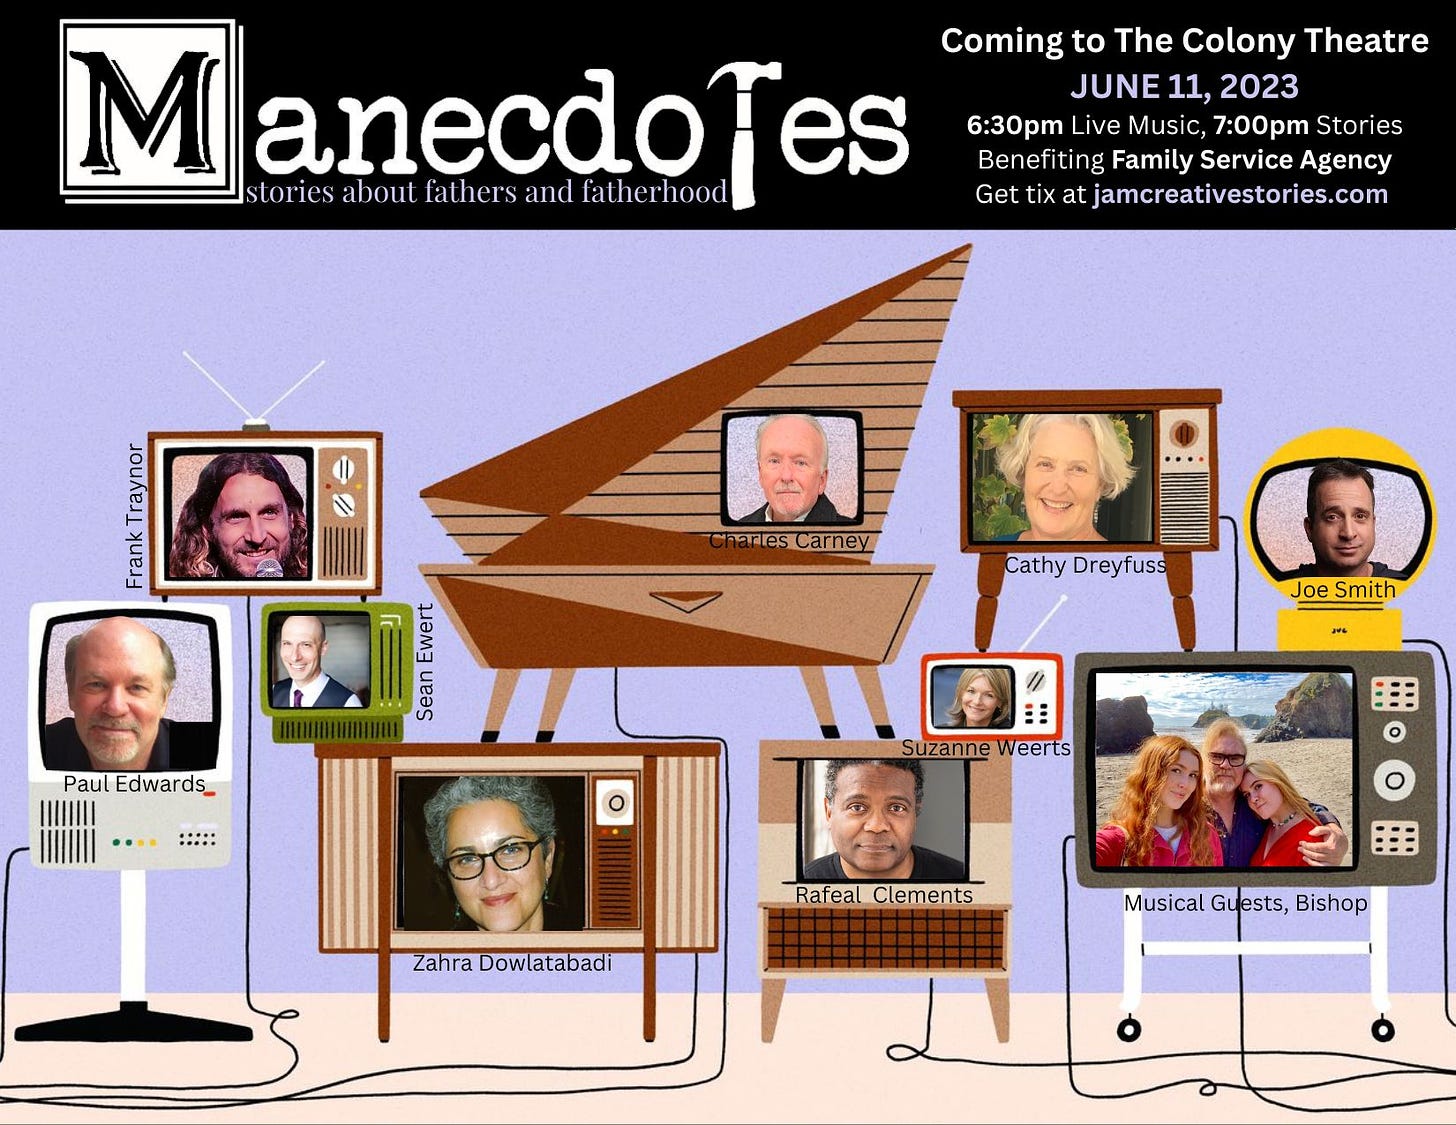 May be pop art of 11 people and text that says 'M anecdoTes fatherhood Coming to The Colony Theatre JUNE 11, 2023 6:30pm Live Music, 7:00pm Stories Benefiting Family Service Agency stories about fathers and Get jamcreativestories.com Kpo Charles Carney TAME uras Cathy Dreyfuss Paul Edwards_ Joe Smith … Suzanne Weerts Rafeal Clements ZahDw Dowlatabadi Musical Guests, Bishop'